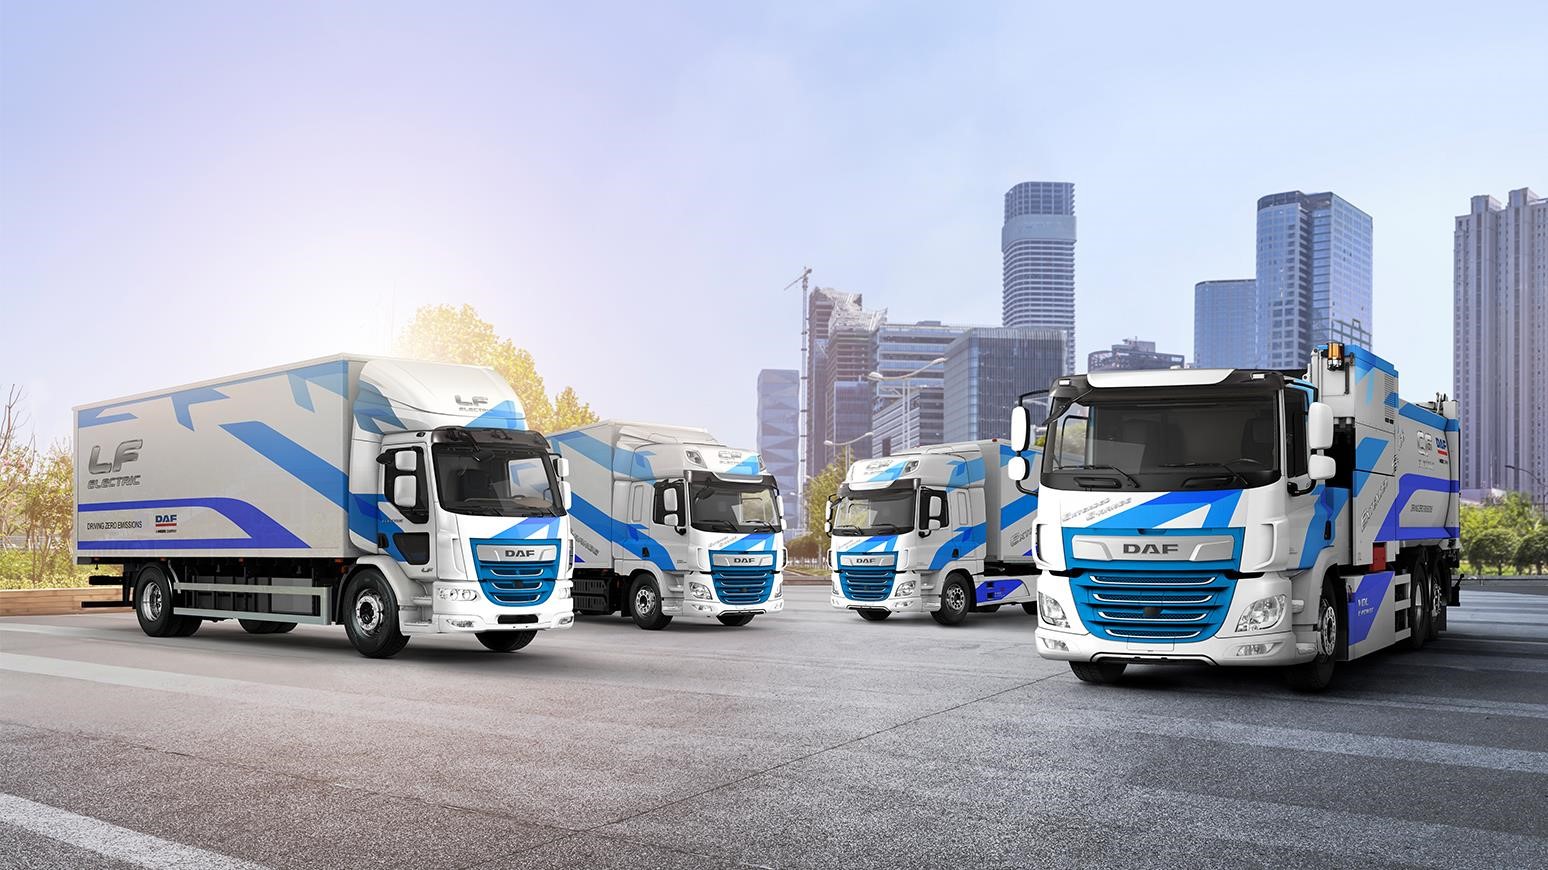 DAF Trucks Exhibit LF Electric & CF Electric For The First Time At ITT Hub